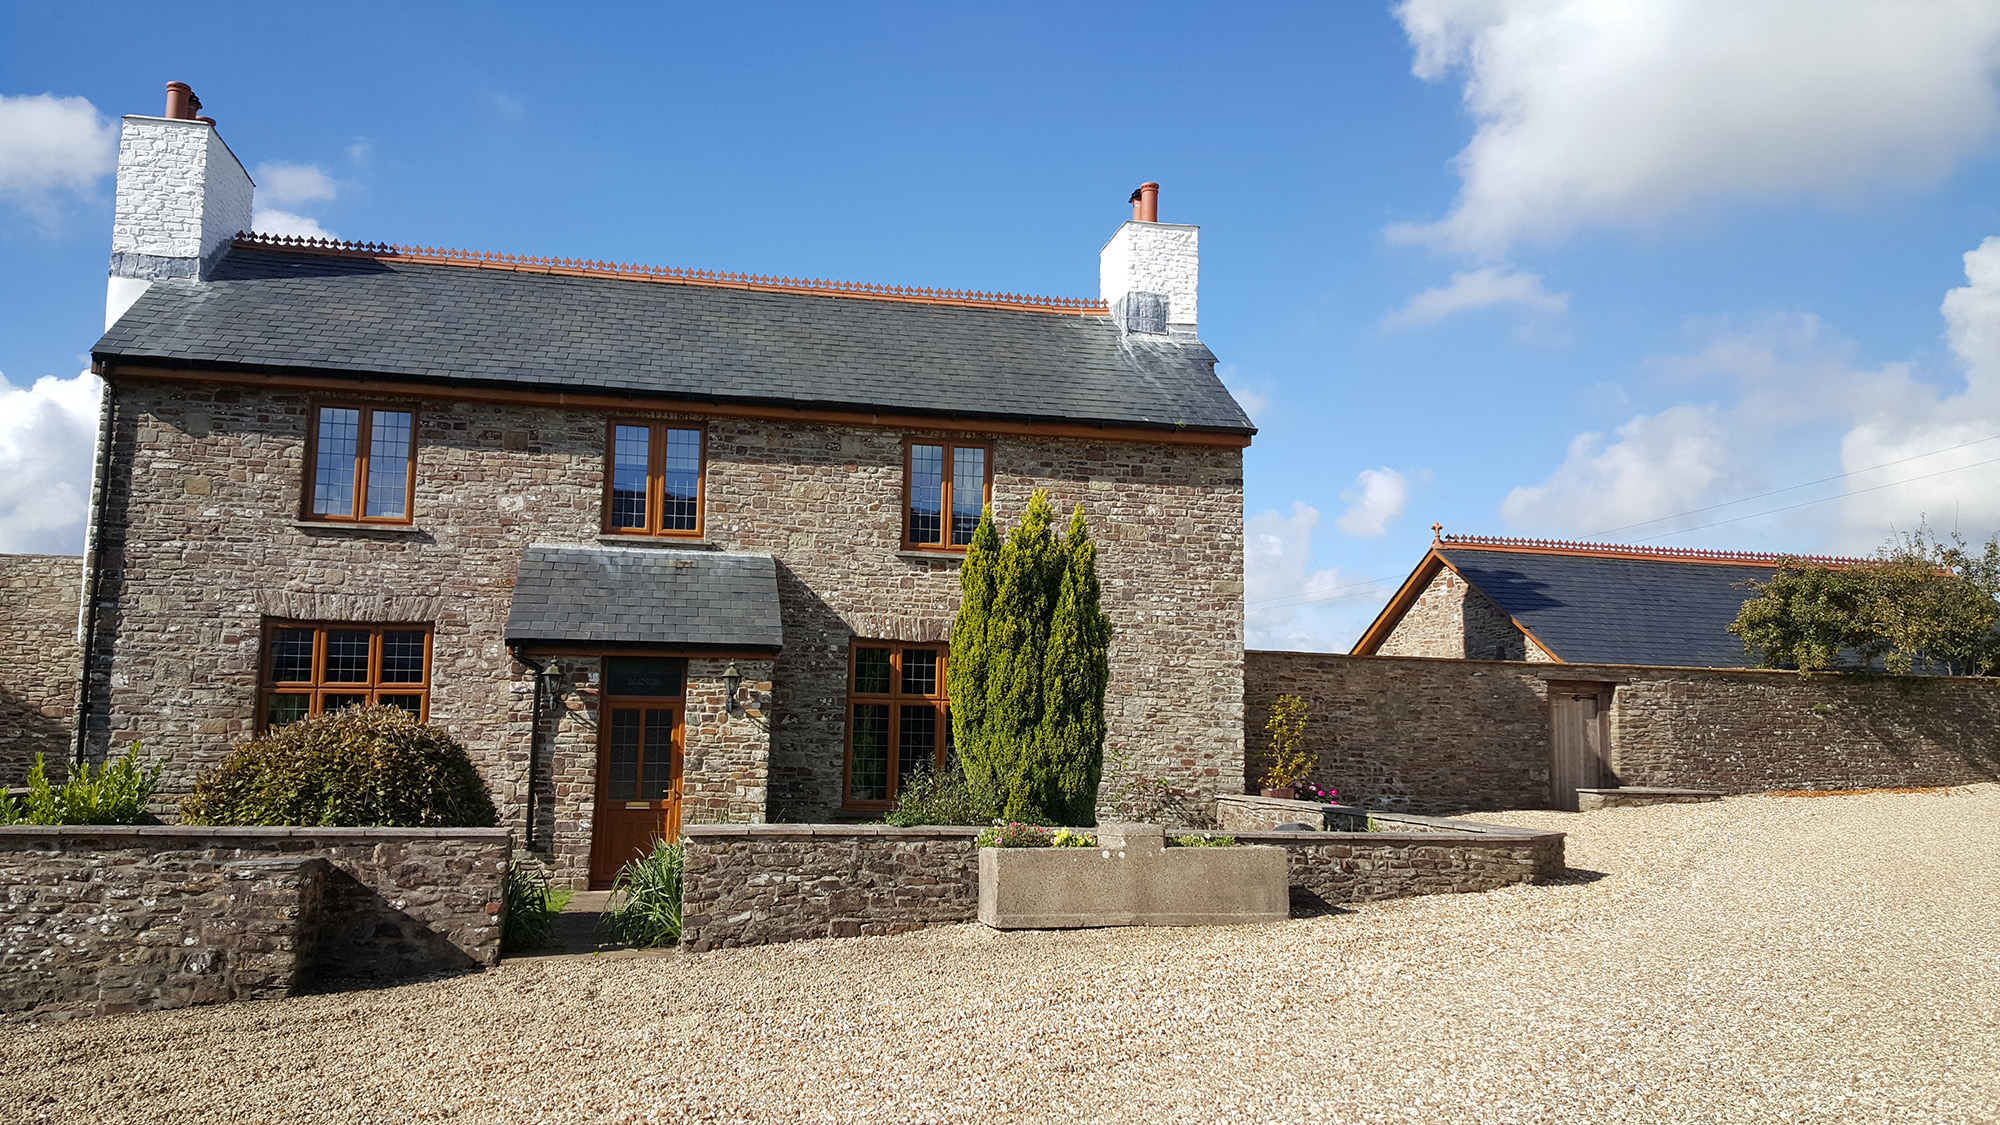 5 bed country house to rent in High Bickington, Devon